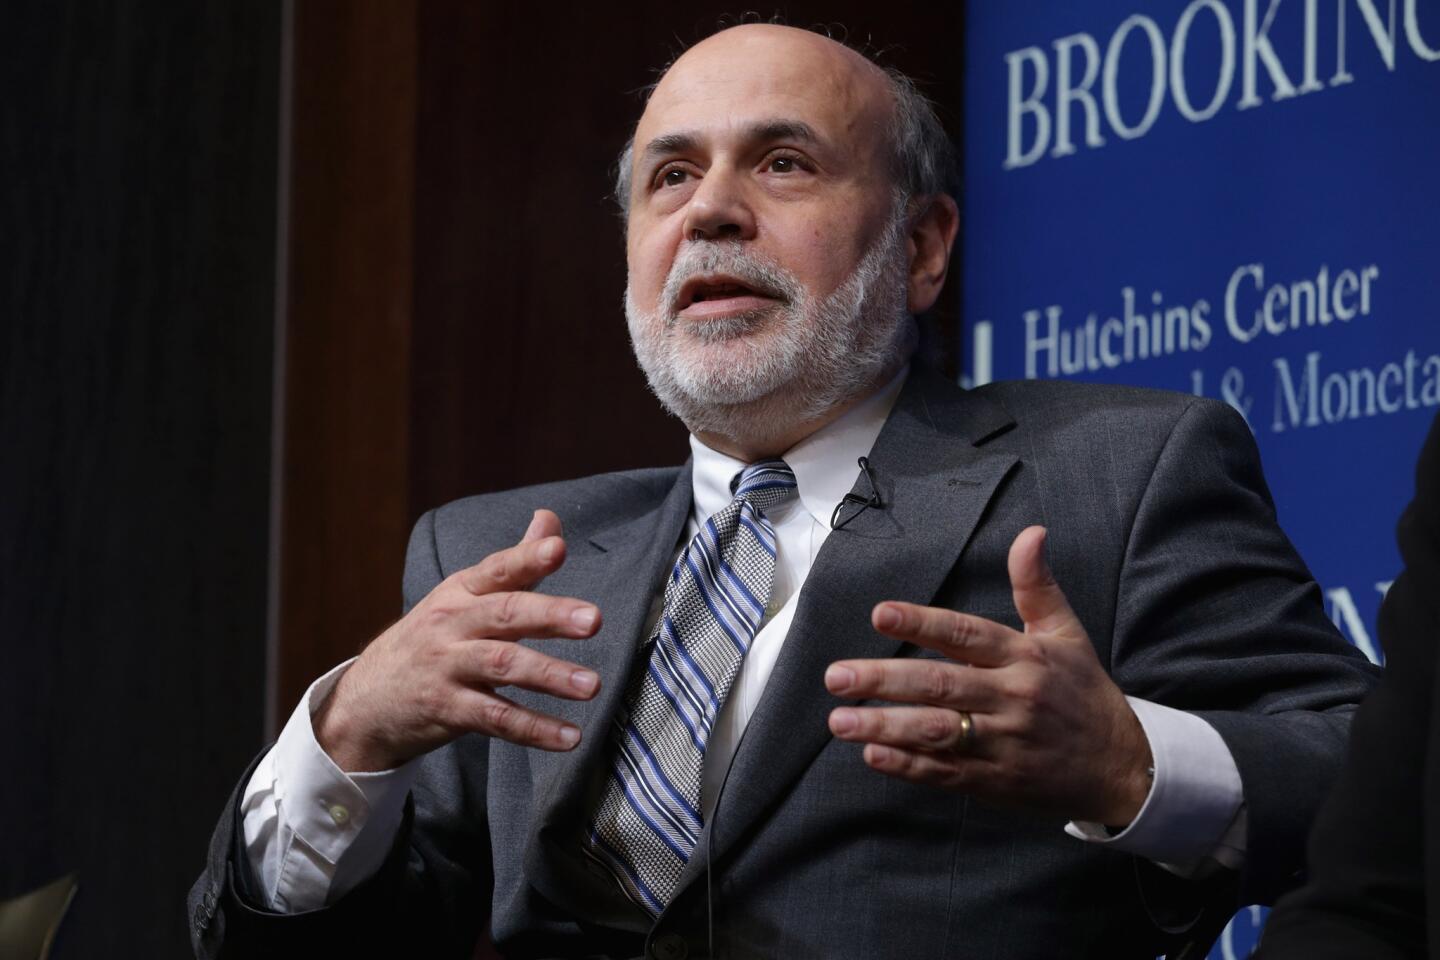 Former Federal Reserve chief Ben Bernanke just took a job with a hedge fund. What are the other Obama Administration's top players in the financial crisis doing now? Here's a look. Bernanke is now an advisor to the Chicago-based Citadel hedge fund. He's also a distinguished fellow in residence at the Brookings Institution think tank in Washington.